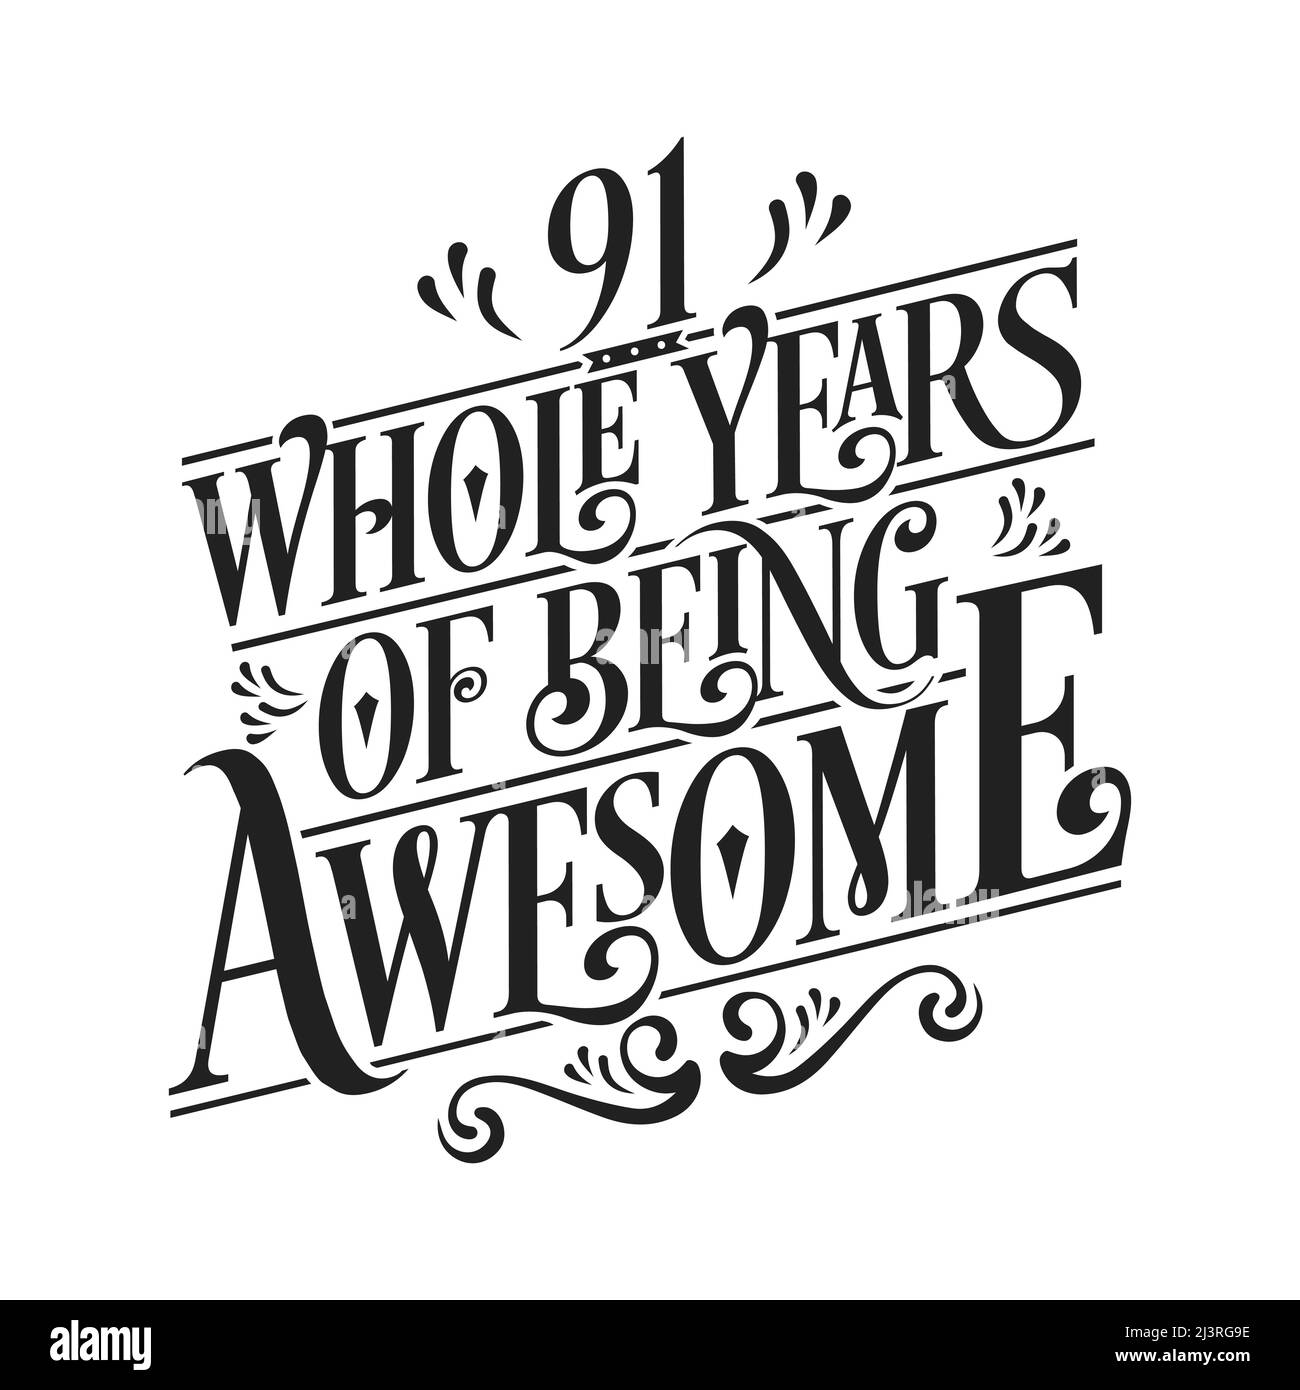 91 whole years of being awesome. 91st birthday celebration lettering Stock Vector